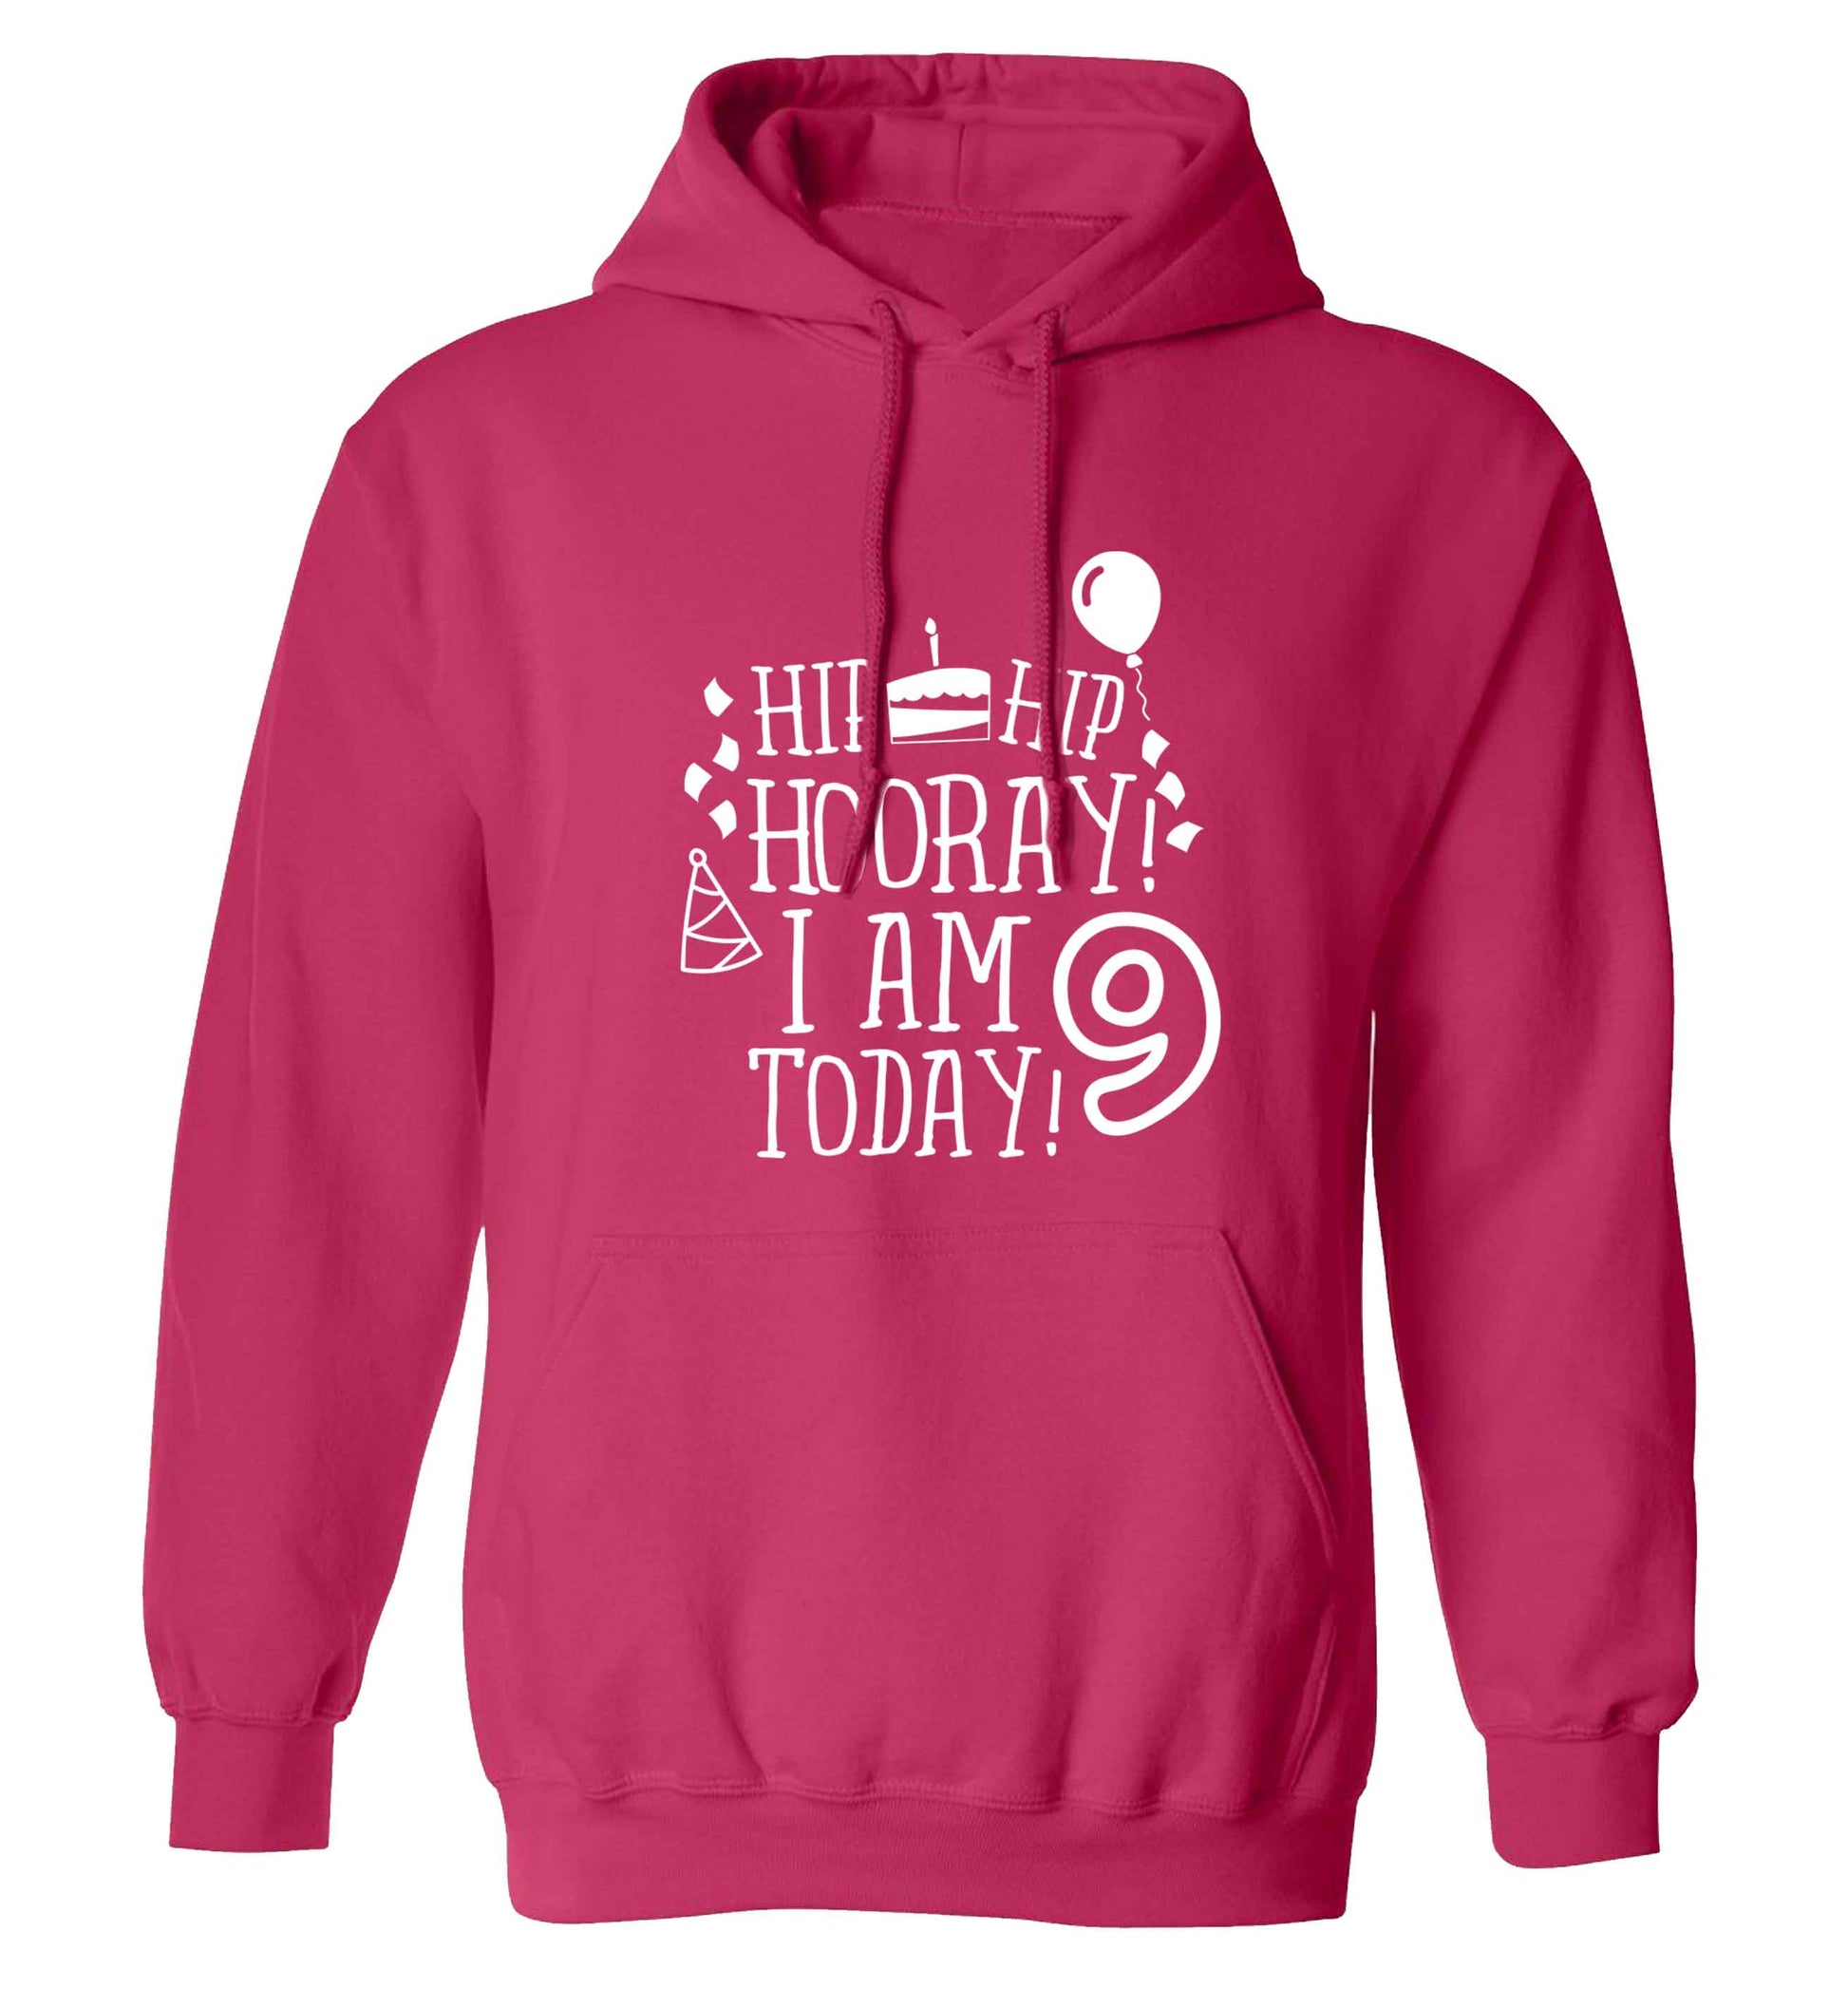 Hip hip hooray I am 9 today! adults unisex pink hoodie 2XL